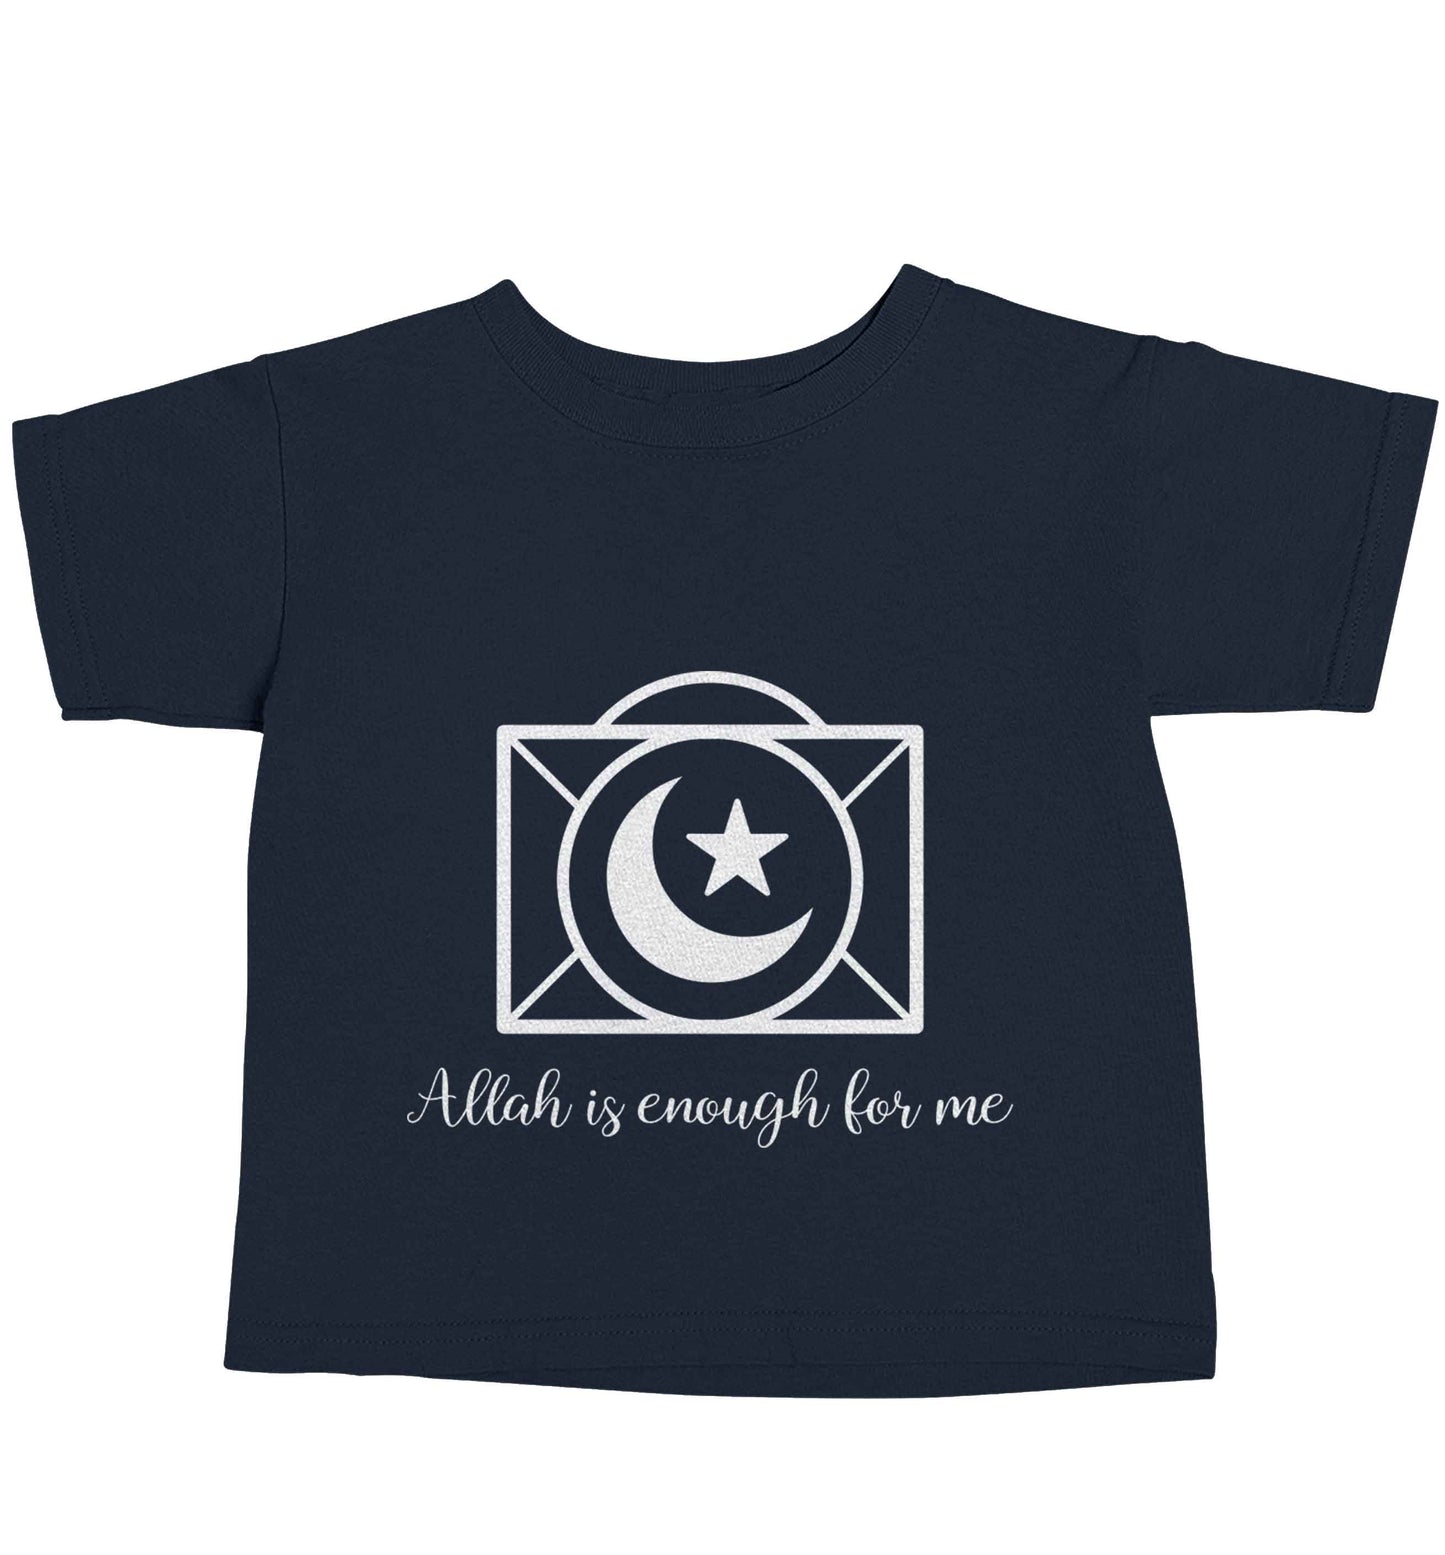 Allah is enough for me navy baby toddler Tshirt 2 Years